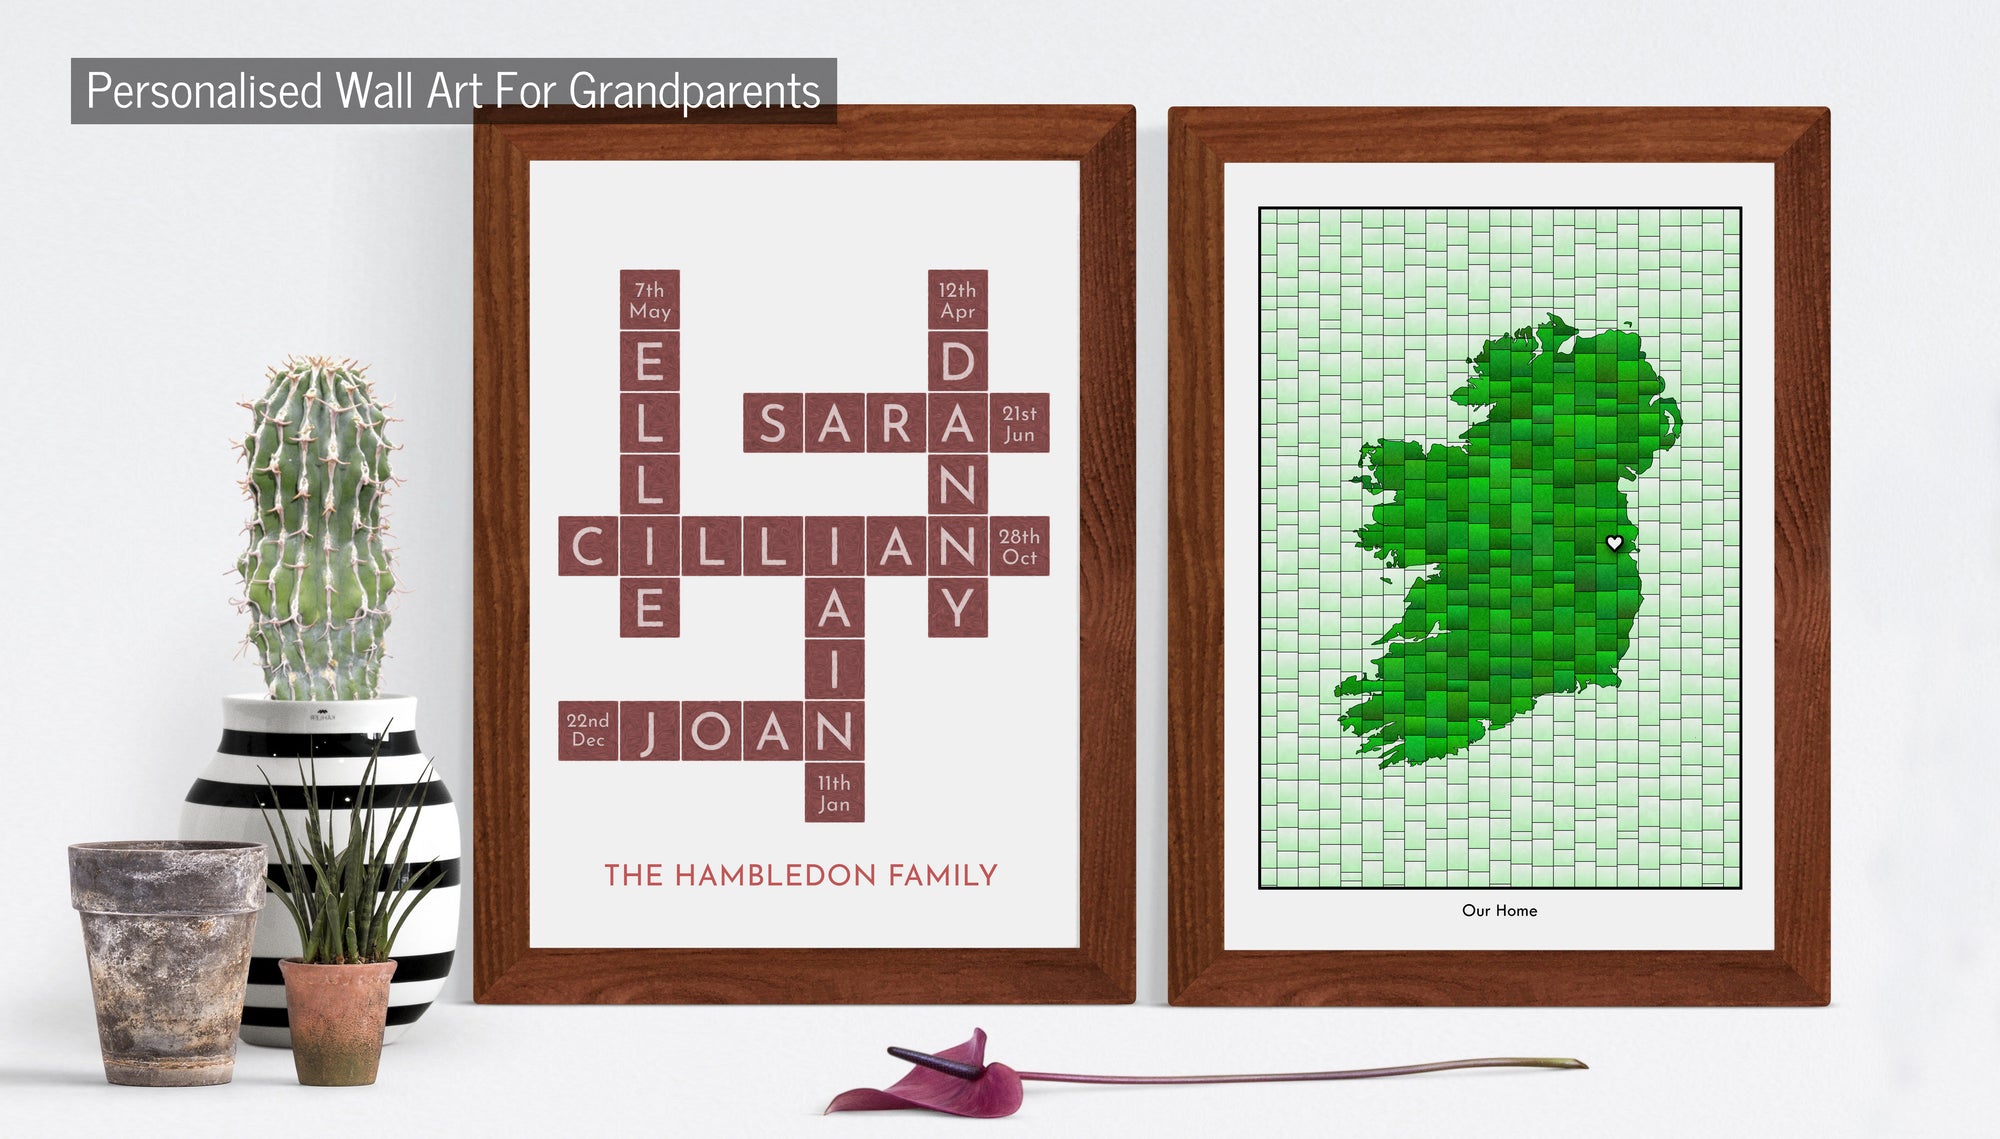 Personalised Wall Art For Grandparents